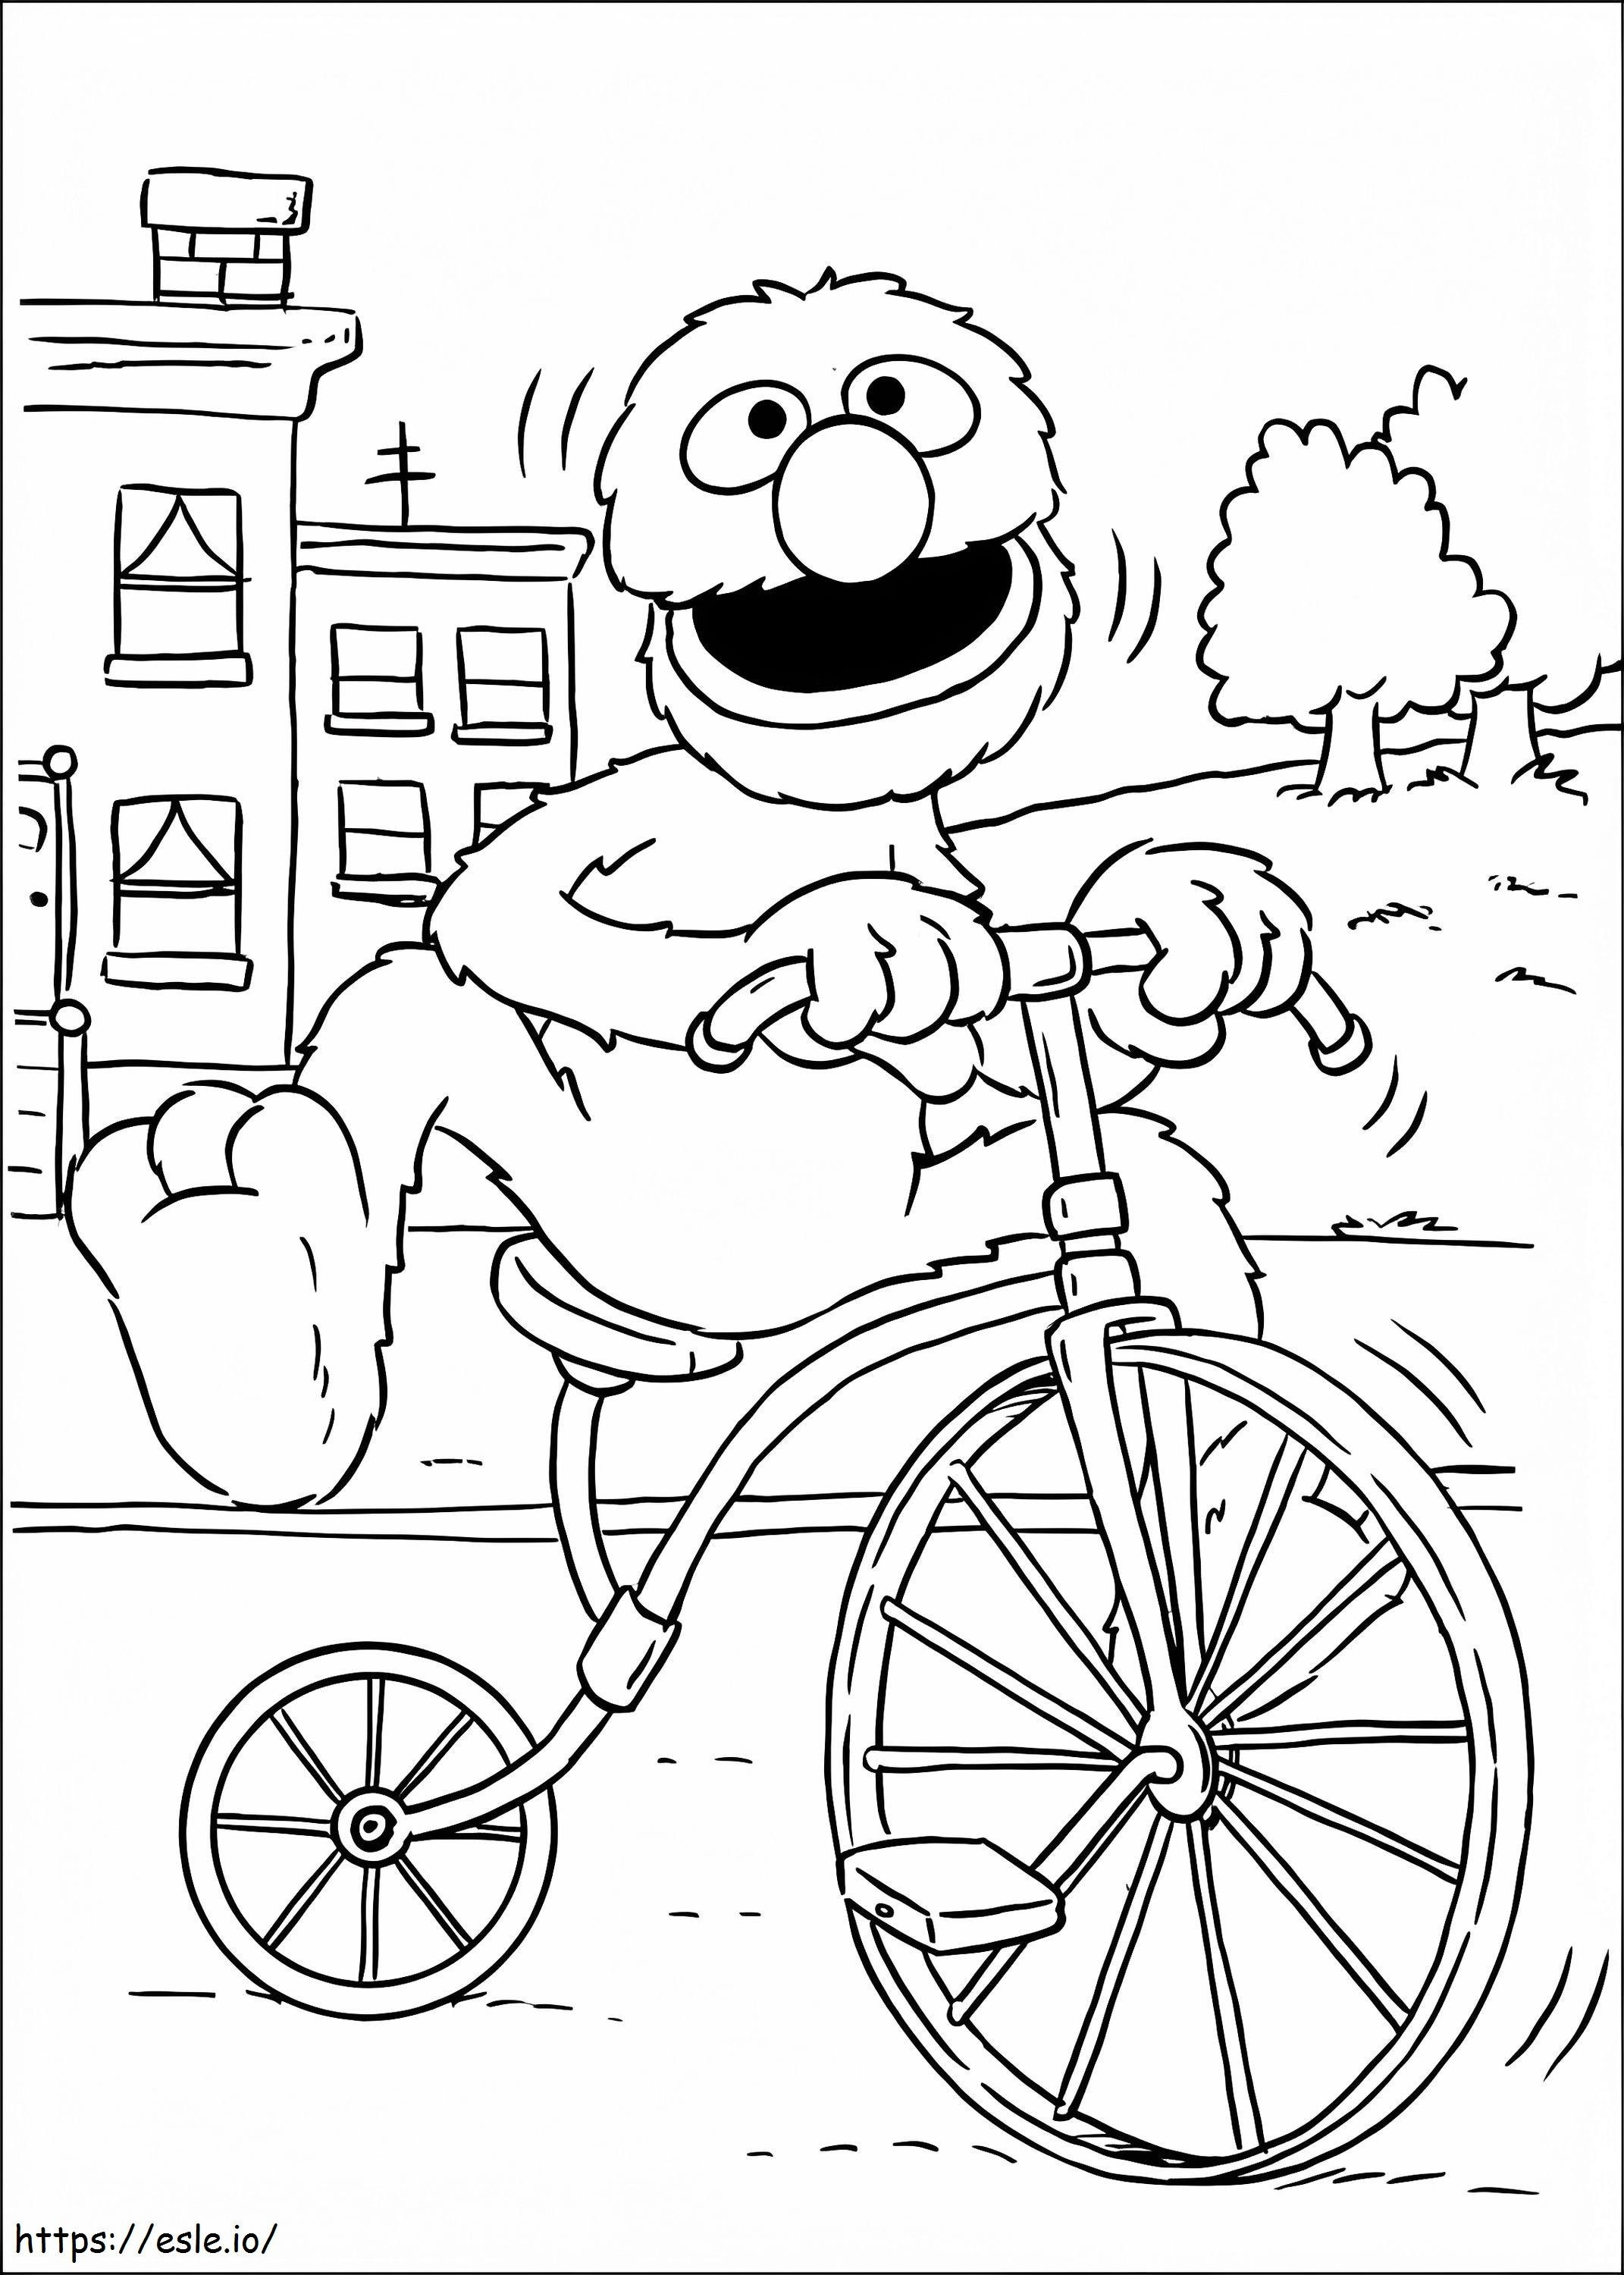 Grover On Bicycle coloring page